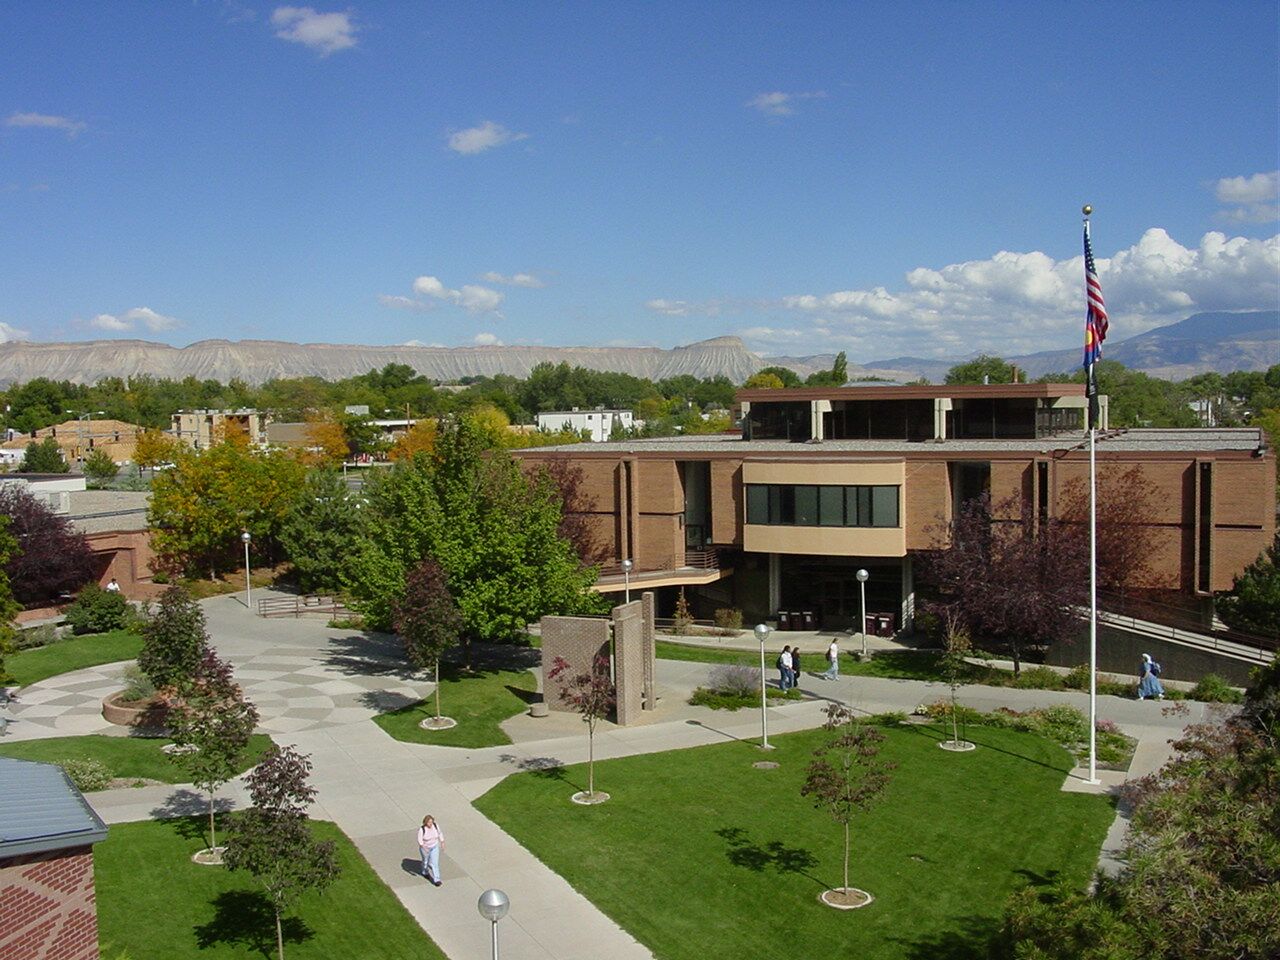 The Top 10 Best Landscaped Colleges, Mountain West Landscaping